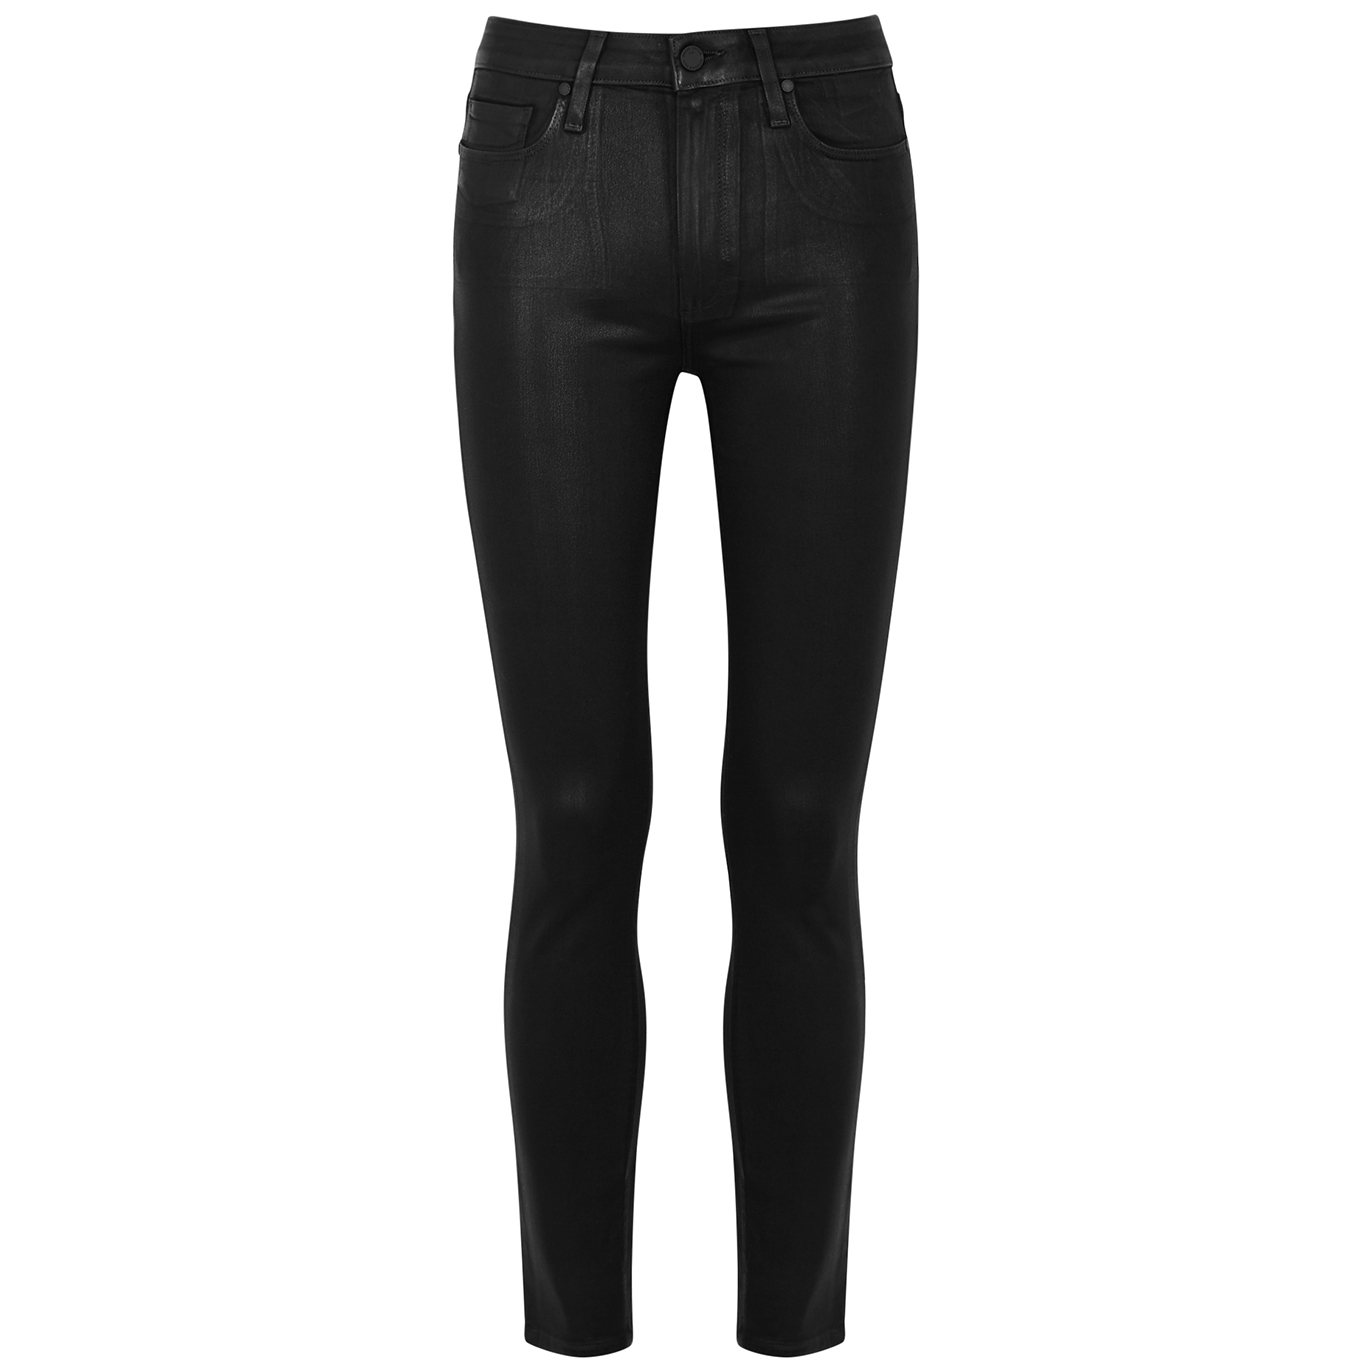 Paige Hoxton Ankle Black Coated Skinny Jeans - W26